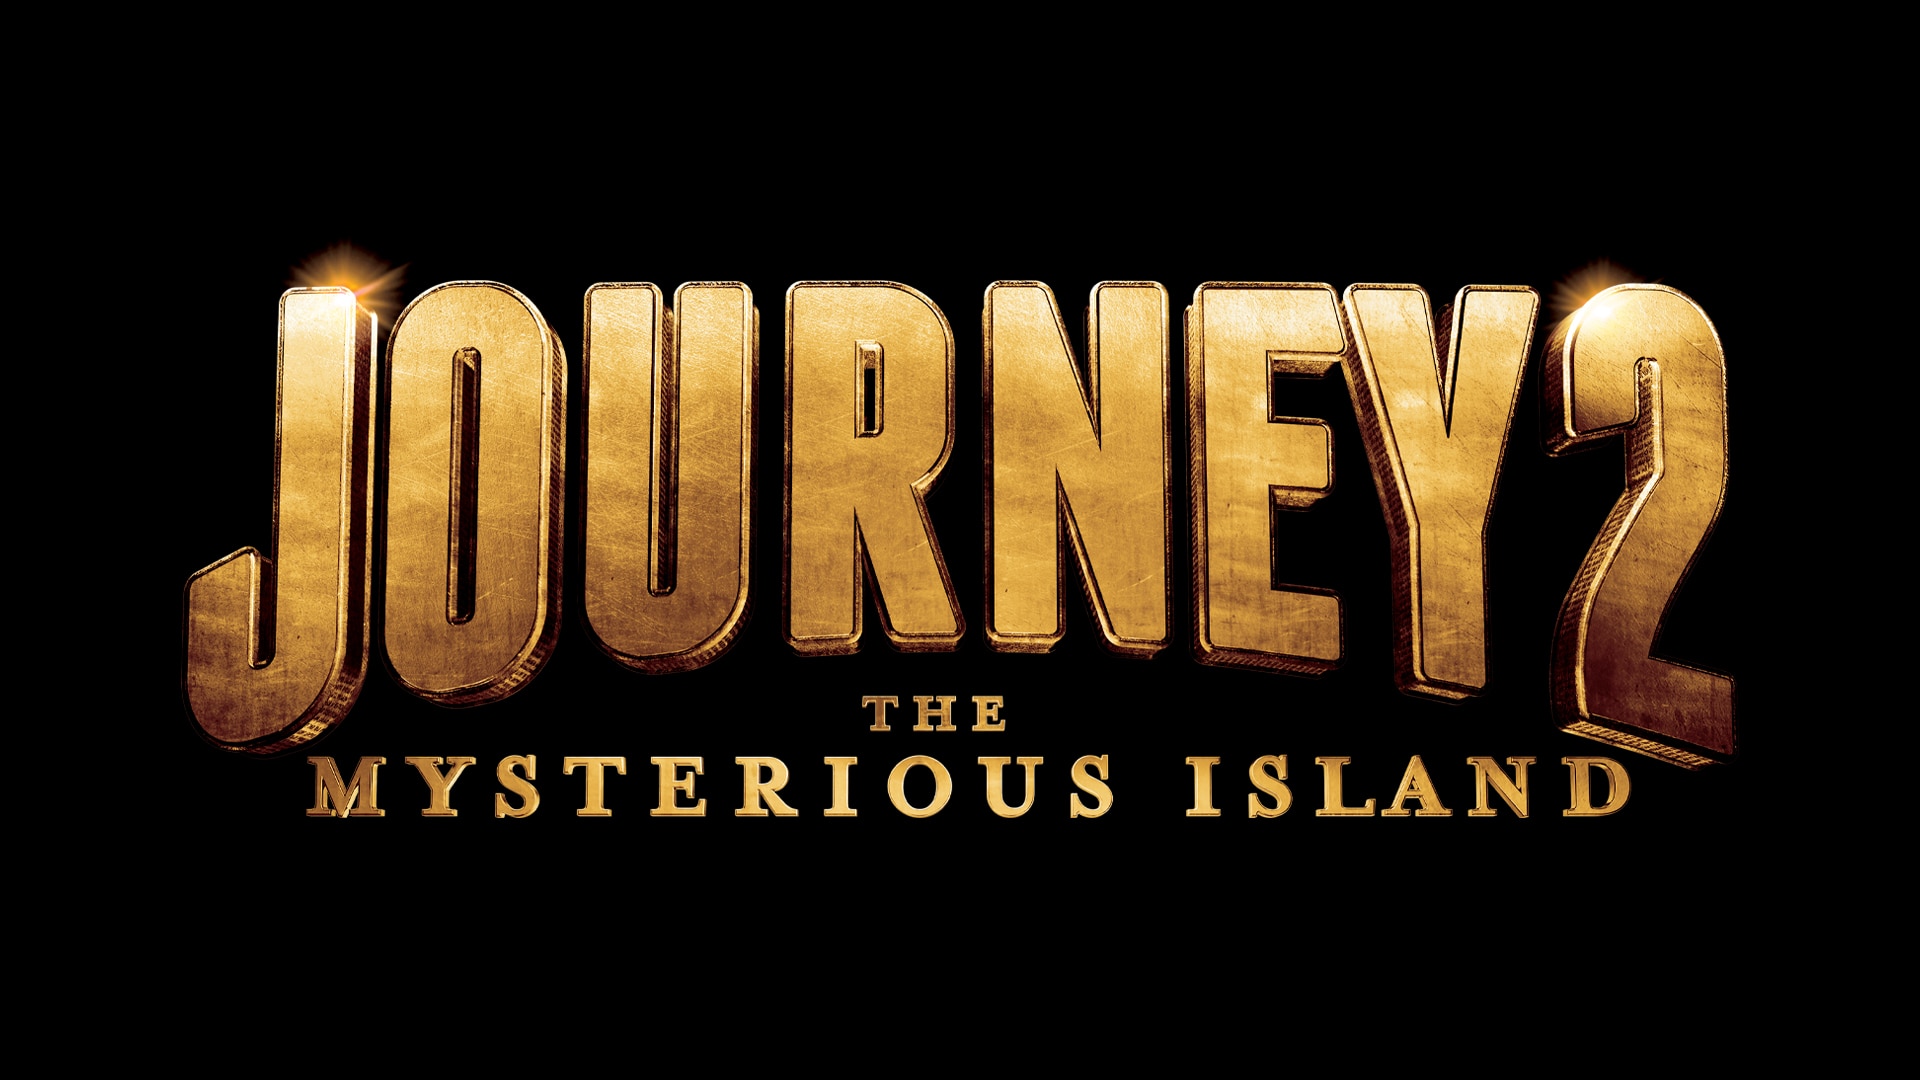 journey of mysterious island